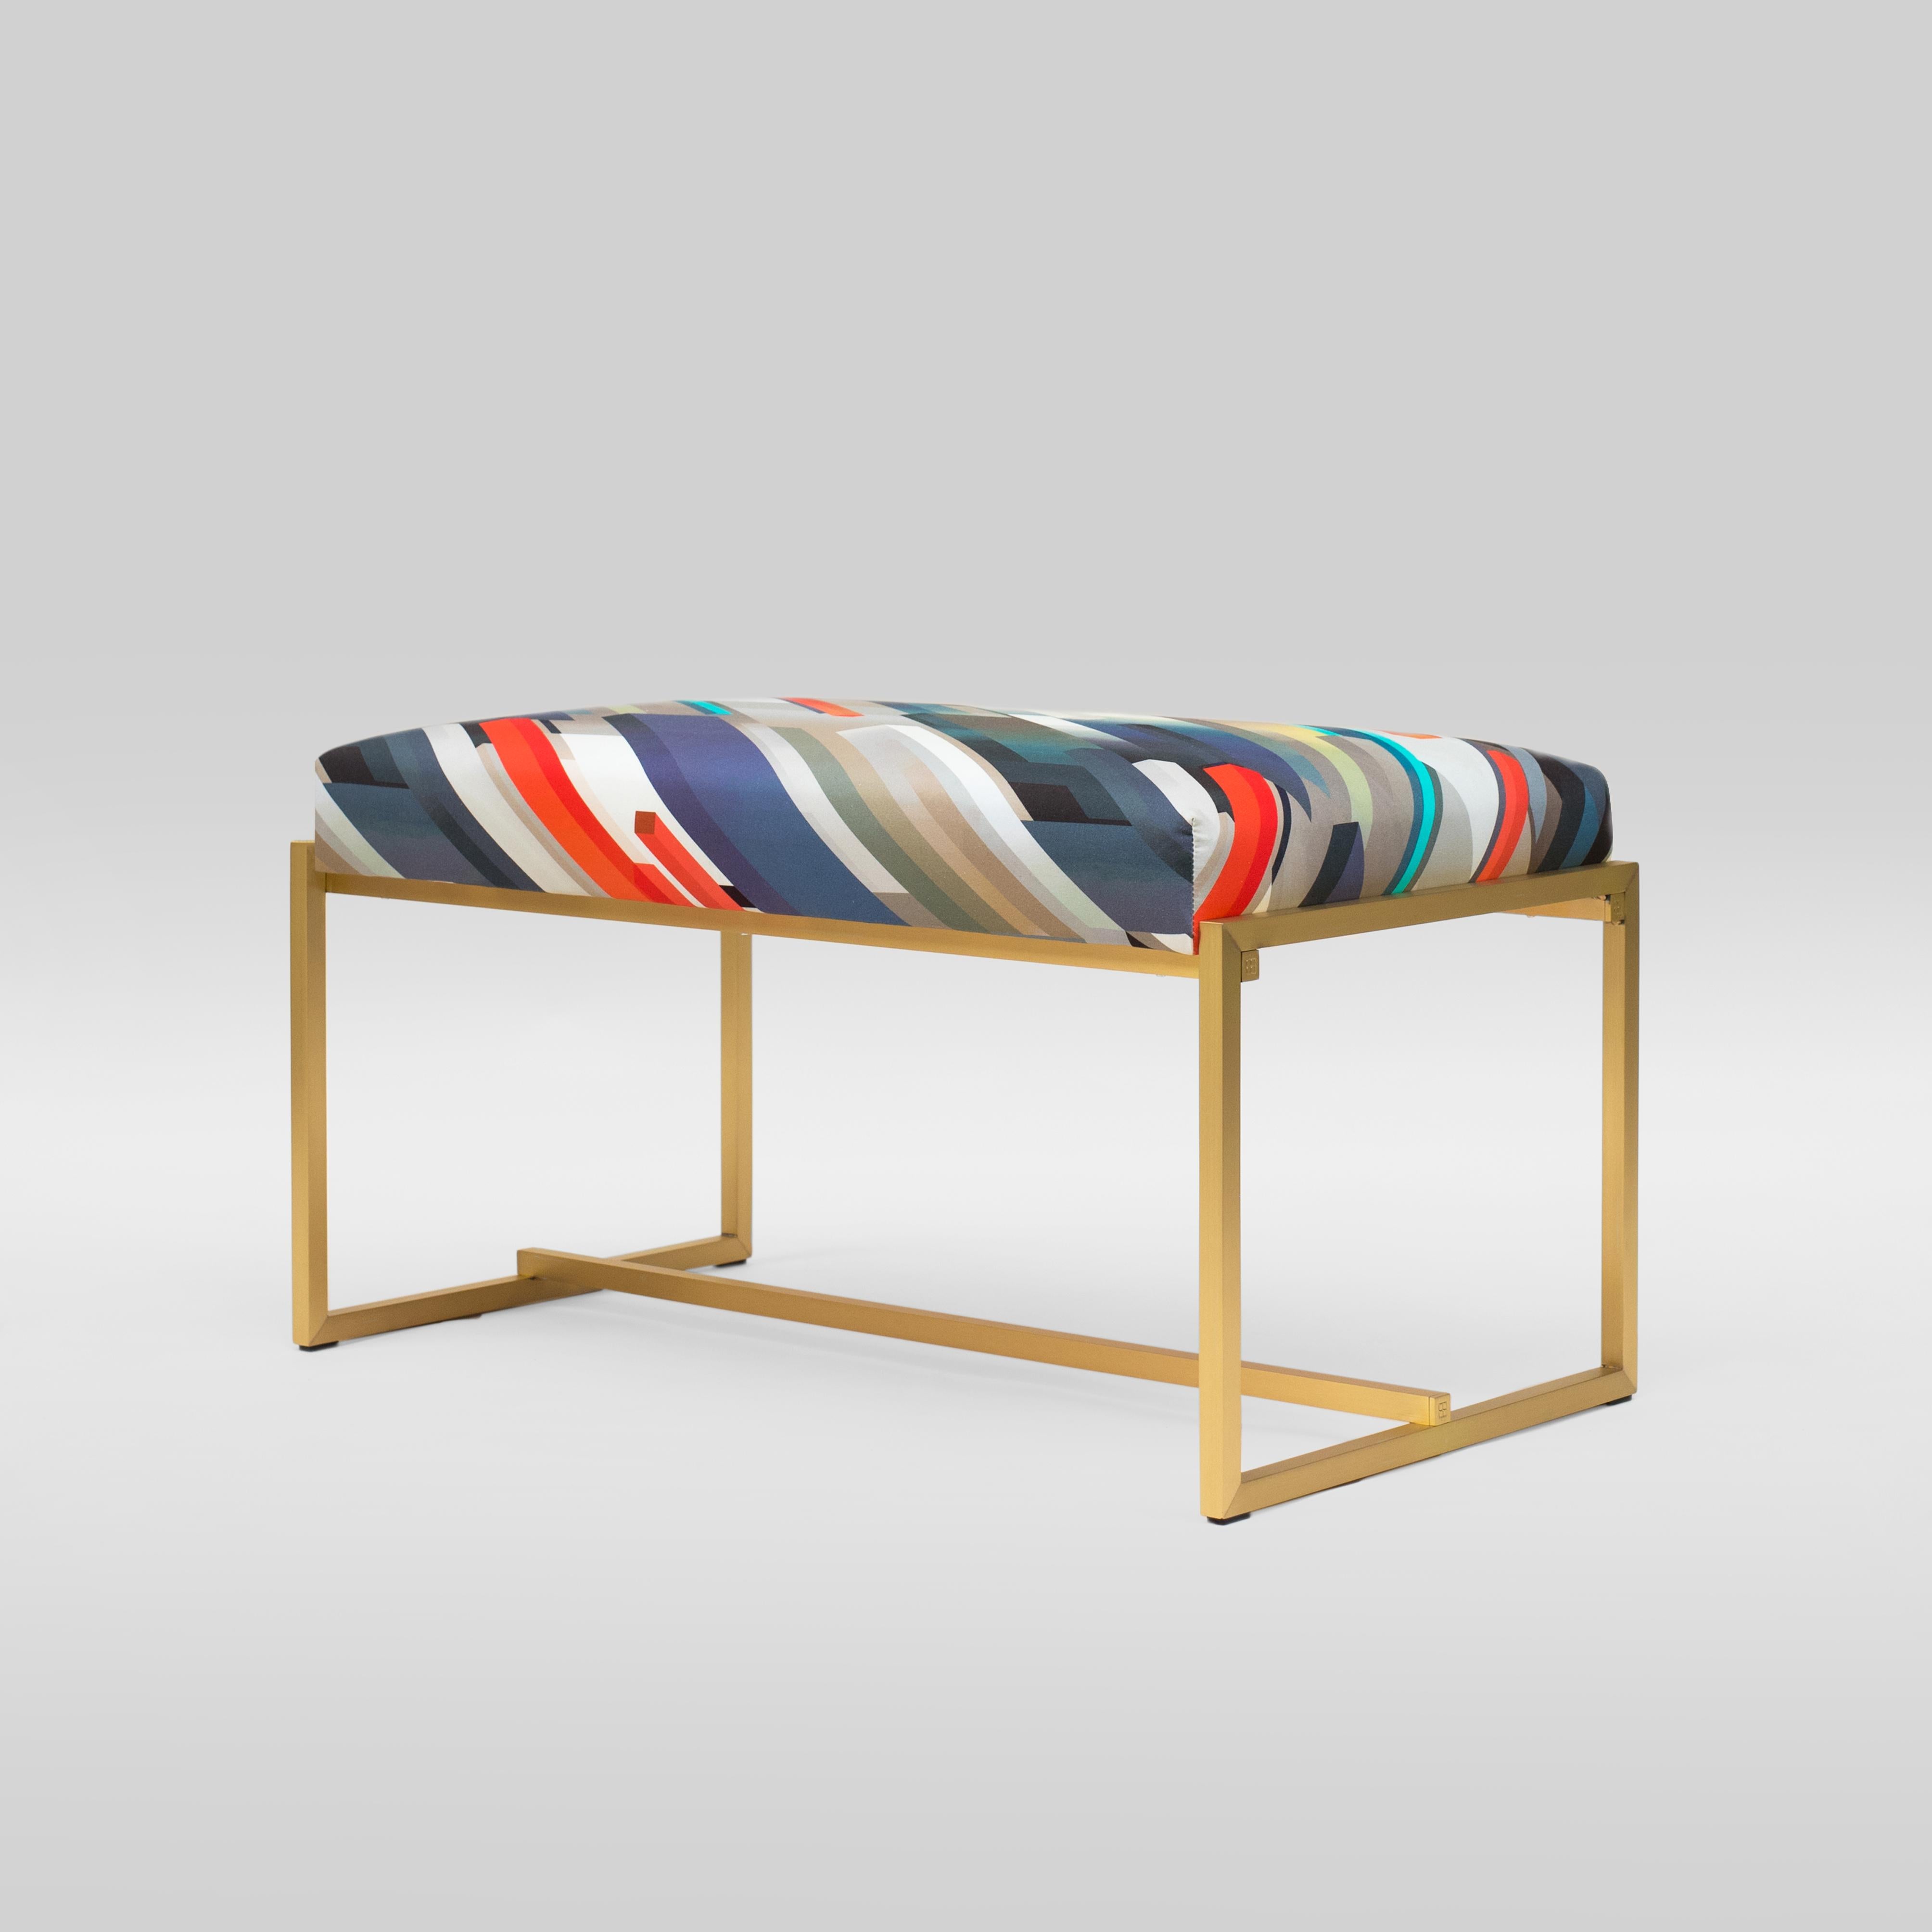 Bench designed by Peter Ghyczy in 2016.
Manufactured by Ghyczy (Netherlands)

Upholstered bench on a slender metal frame. A light weight construction, easy to pick up and move, can be used as footrest or bed-end.

Material and color:
Frame Brass